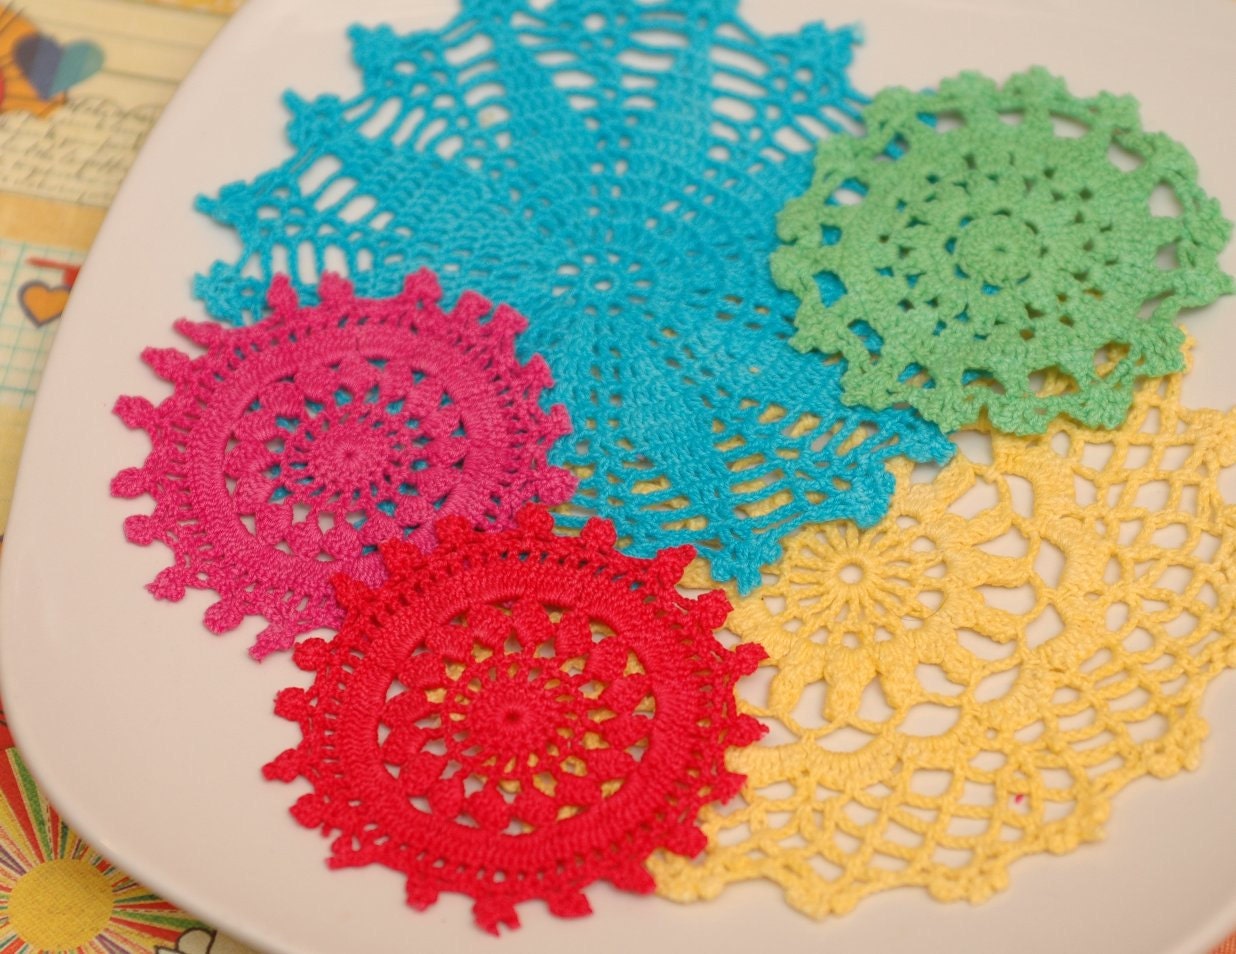 DOILY BRIGHTS - bella collection 5